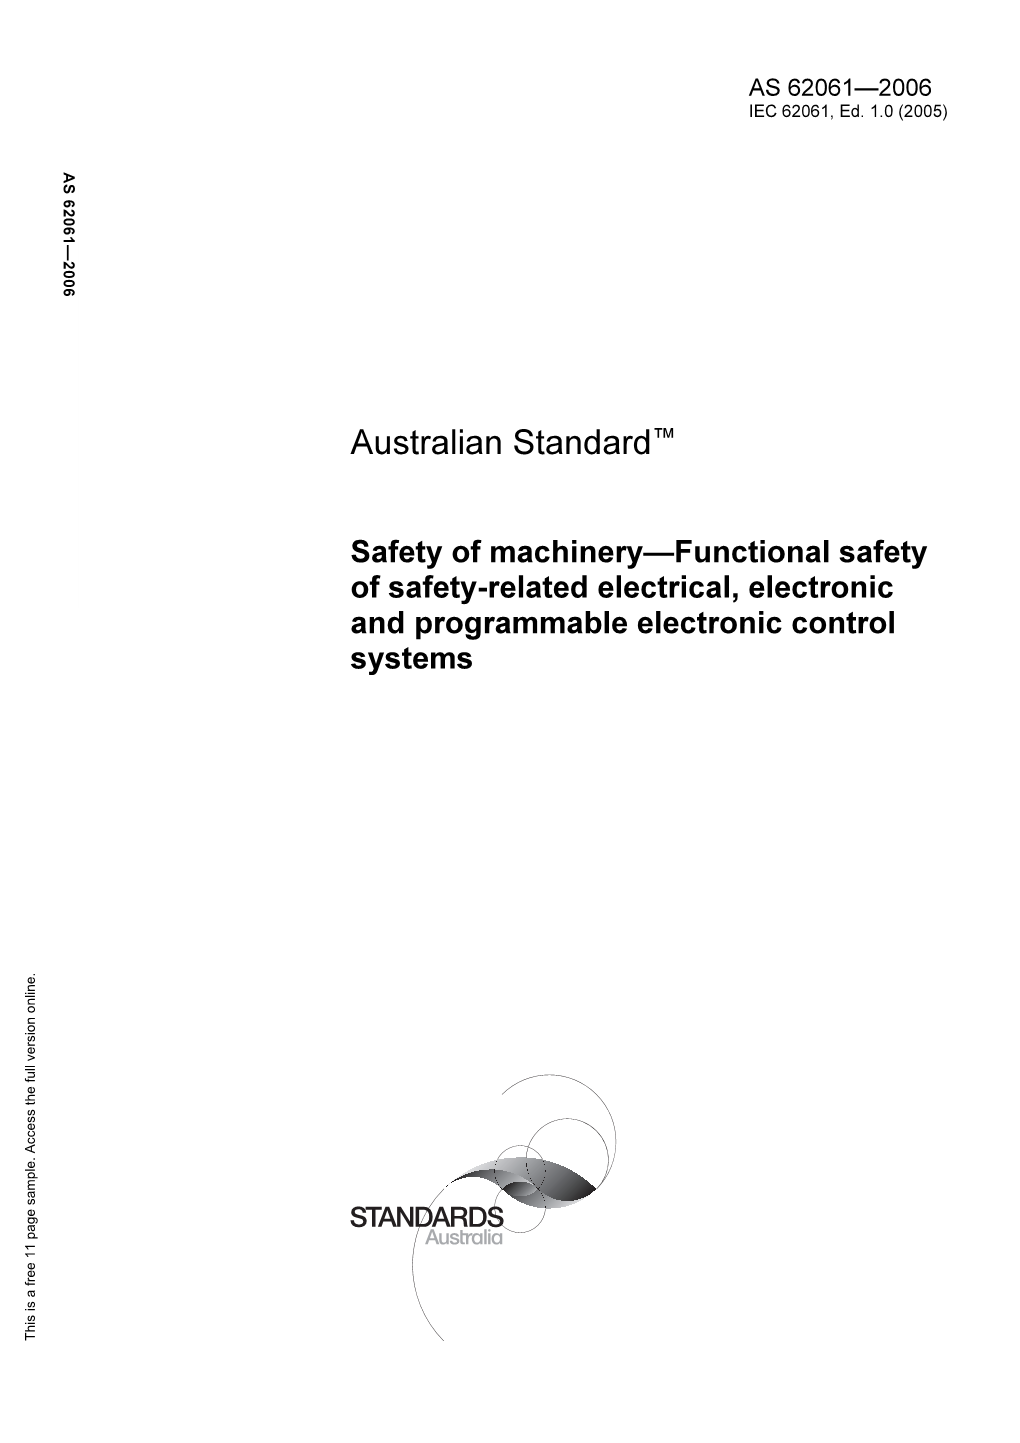 AS 62061-2006 Safety of Machinery